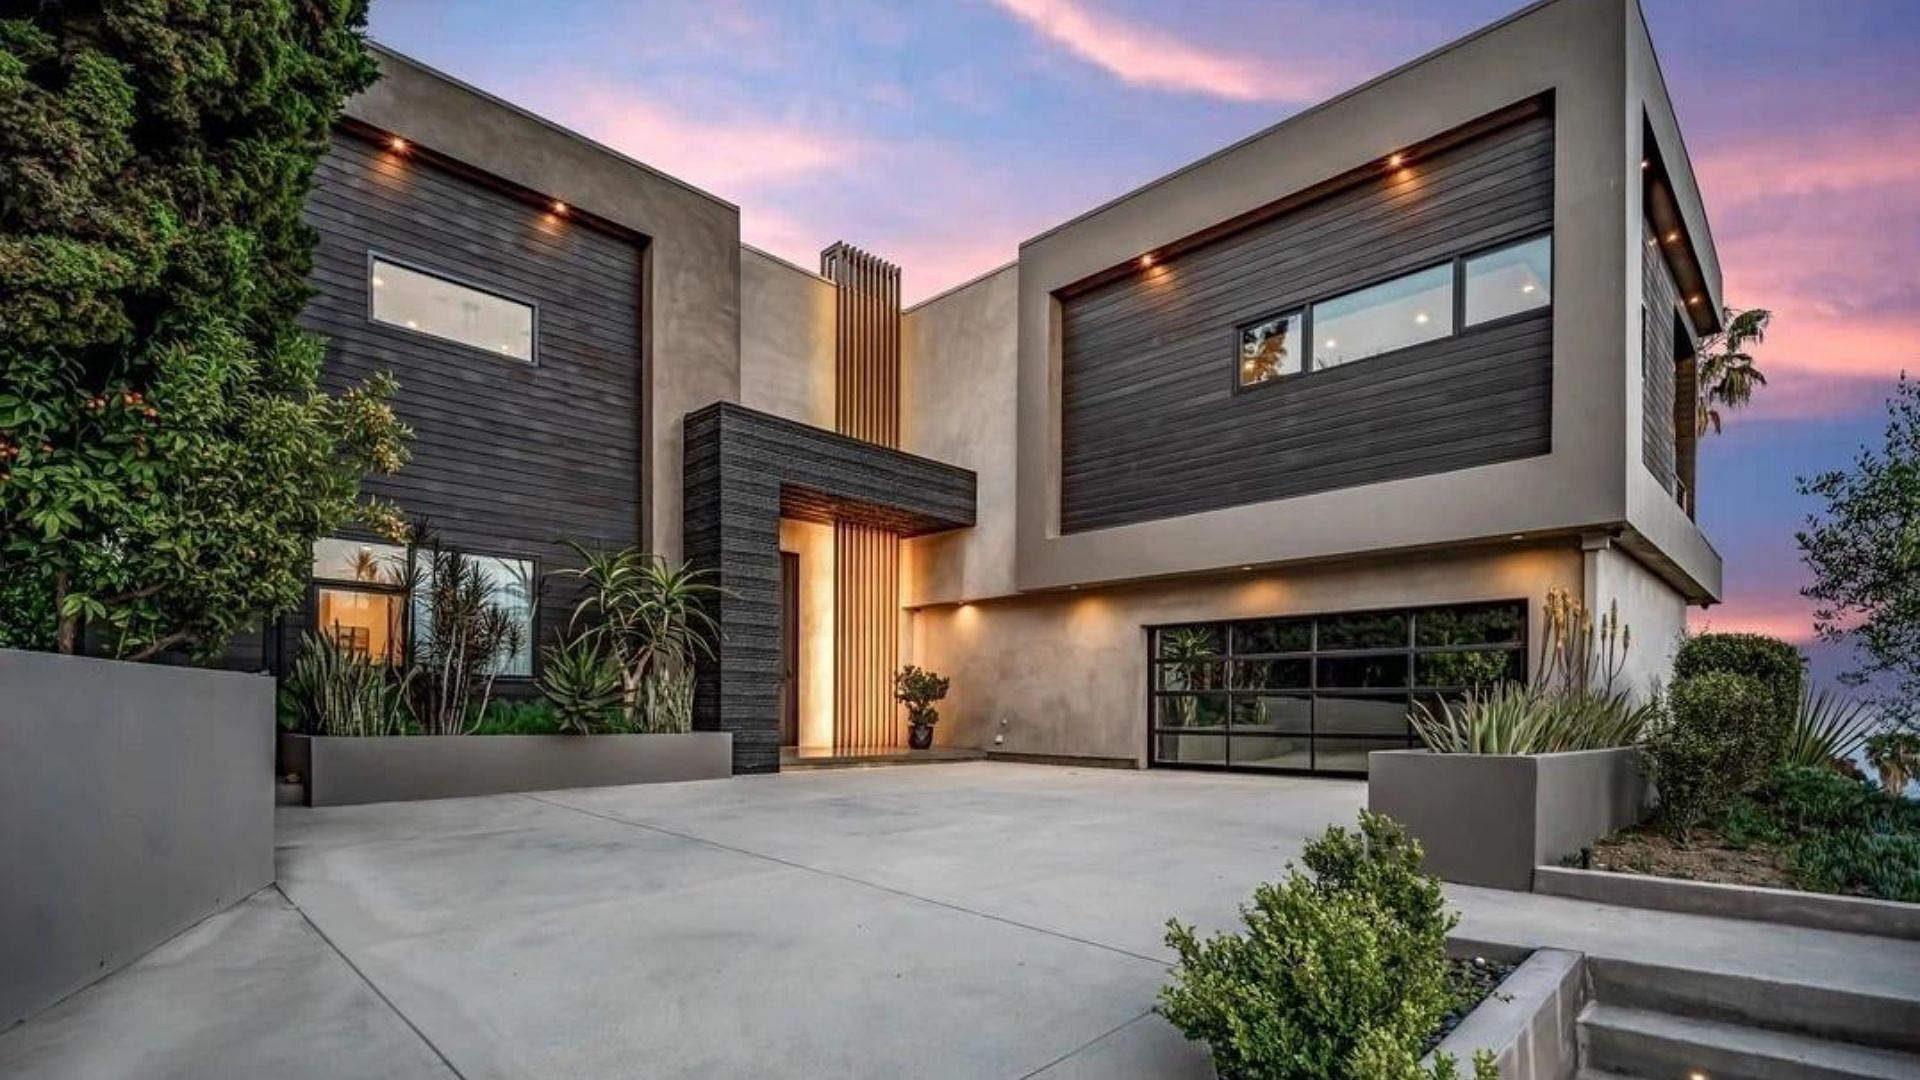 Simu Liu&#039;s Hollywood Hill property featured in the reality series Selling Sunset (Image via Dirt.com).